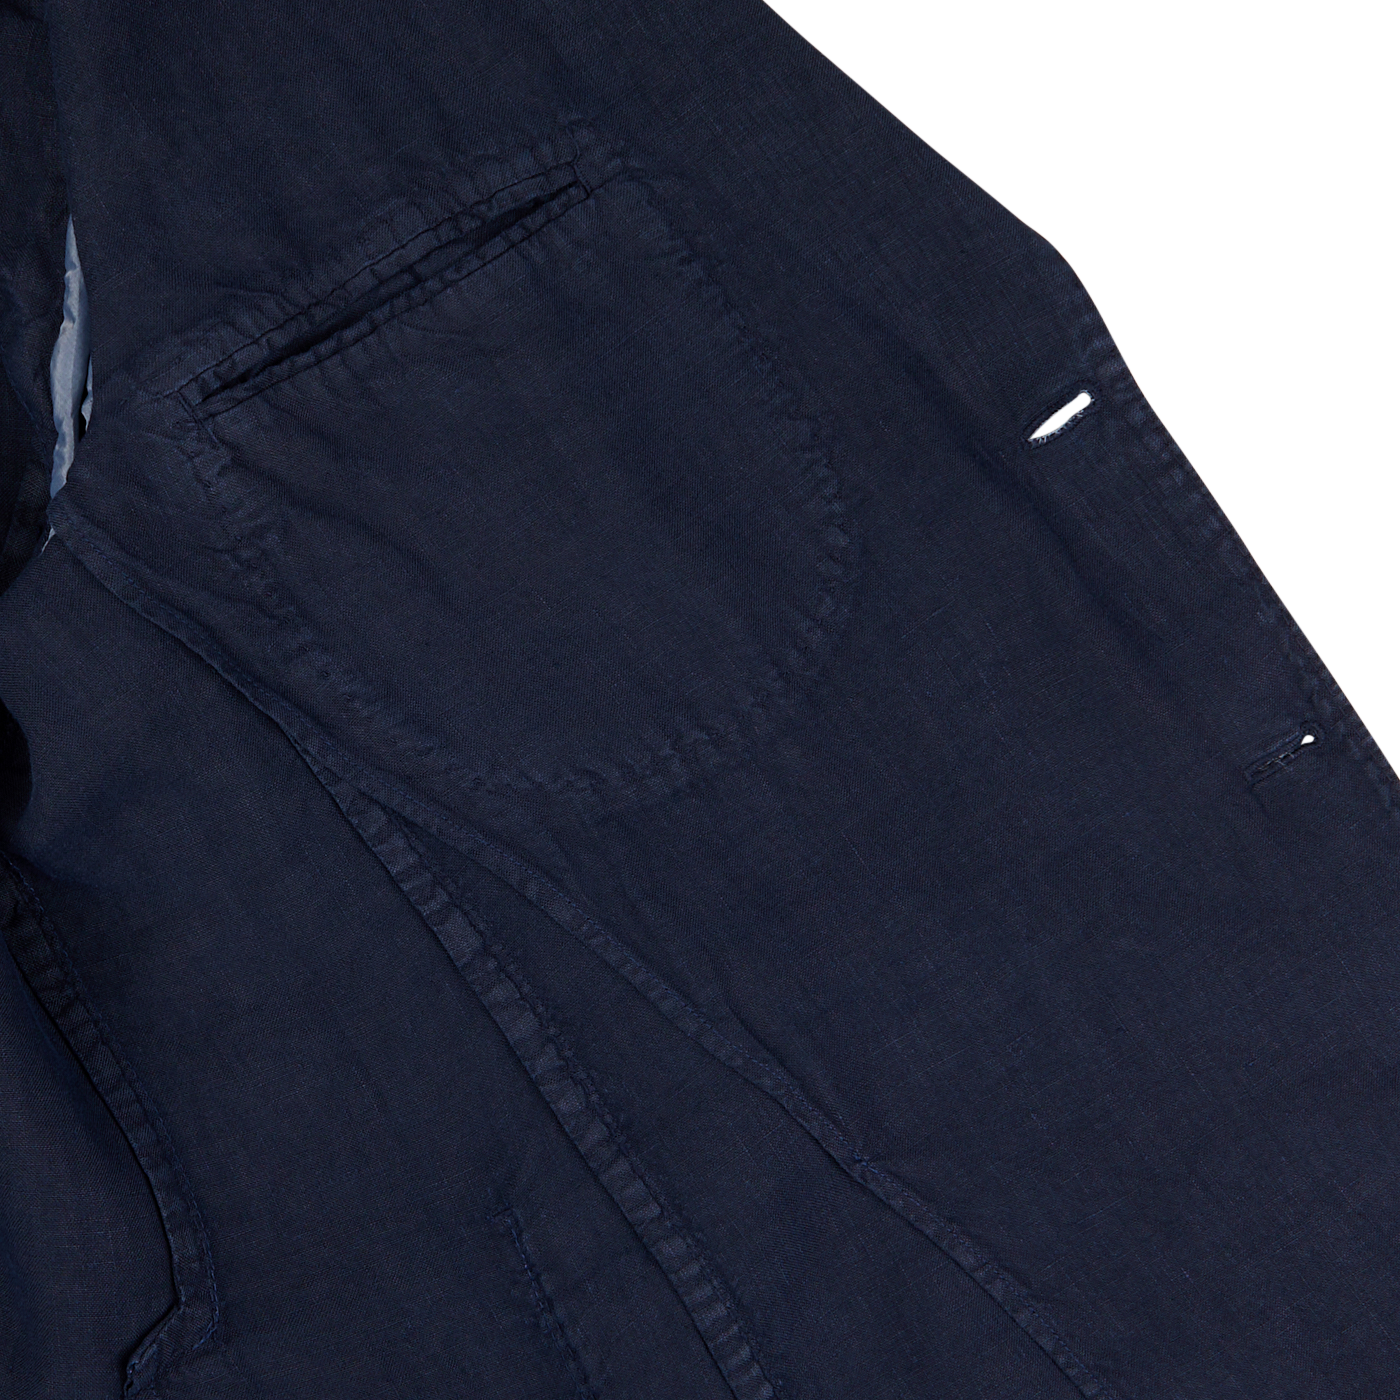 Close-up view of an L.B.M. 1911 navy blue washed linen suit with detailed stitching around the pocket area on a white background.